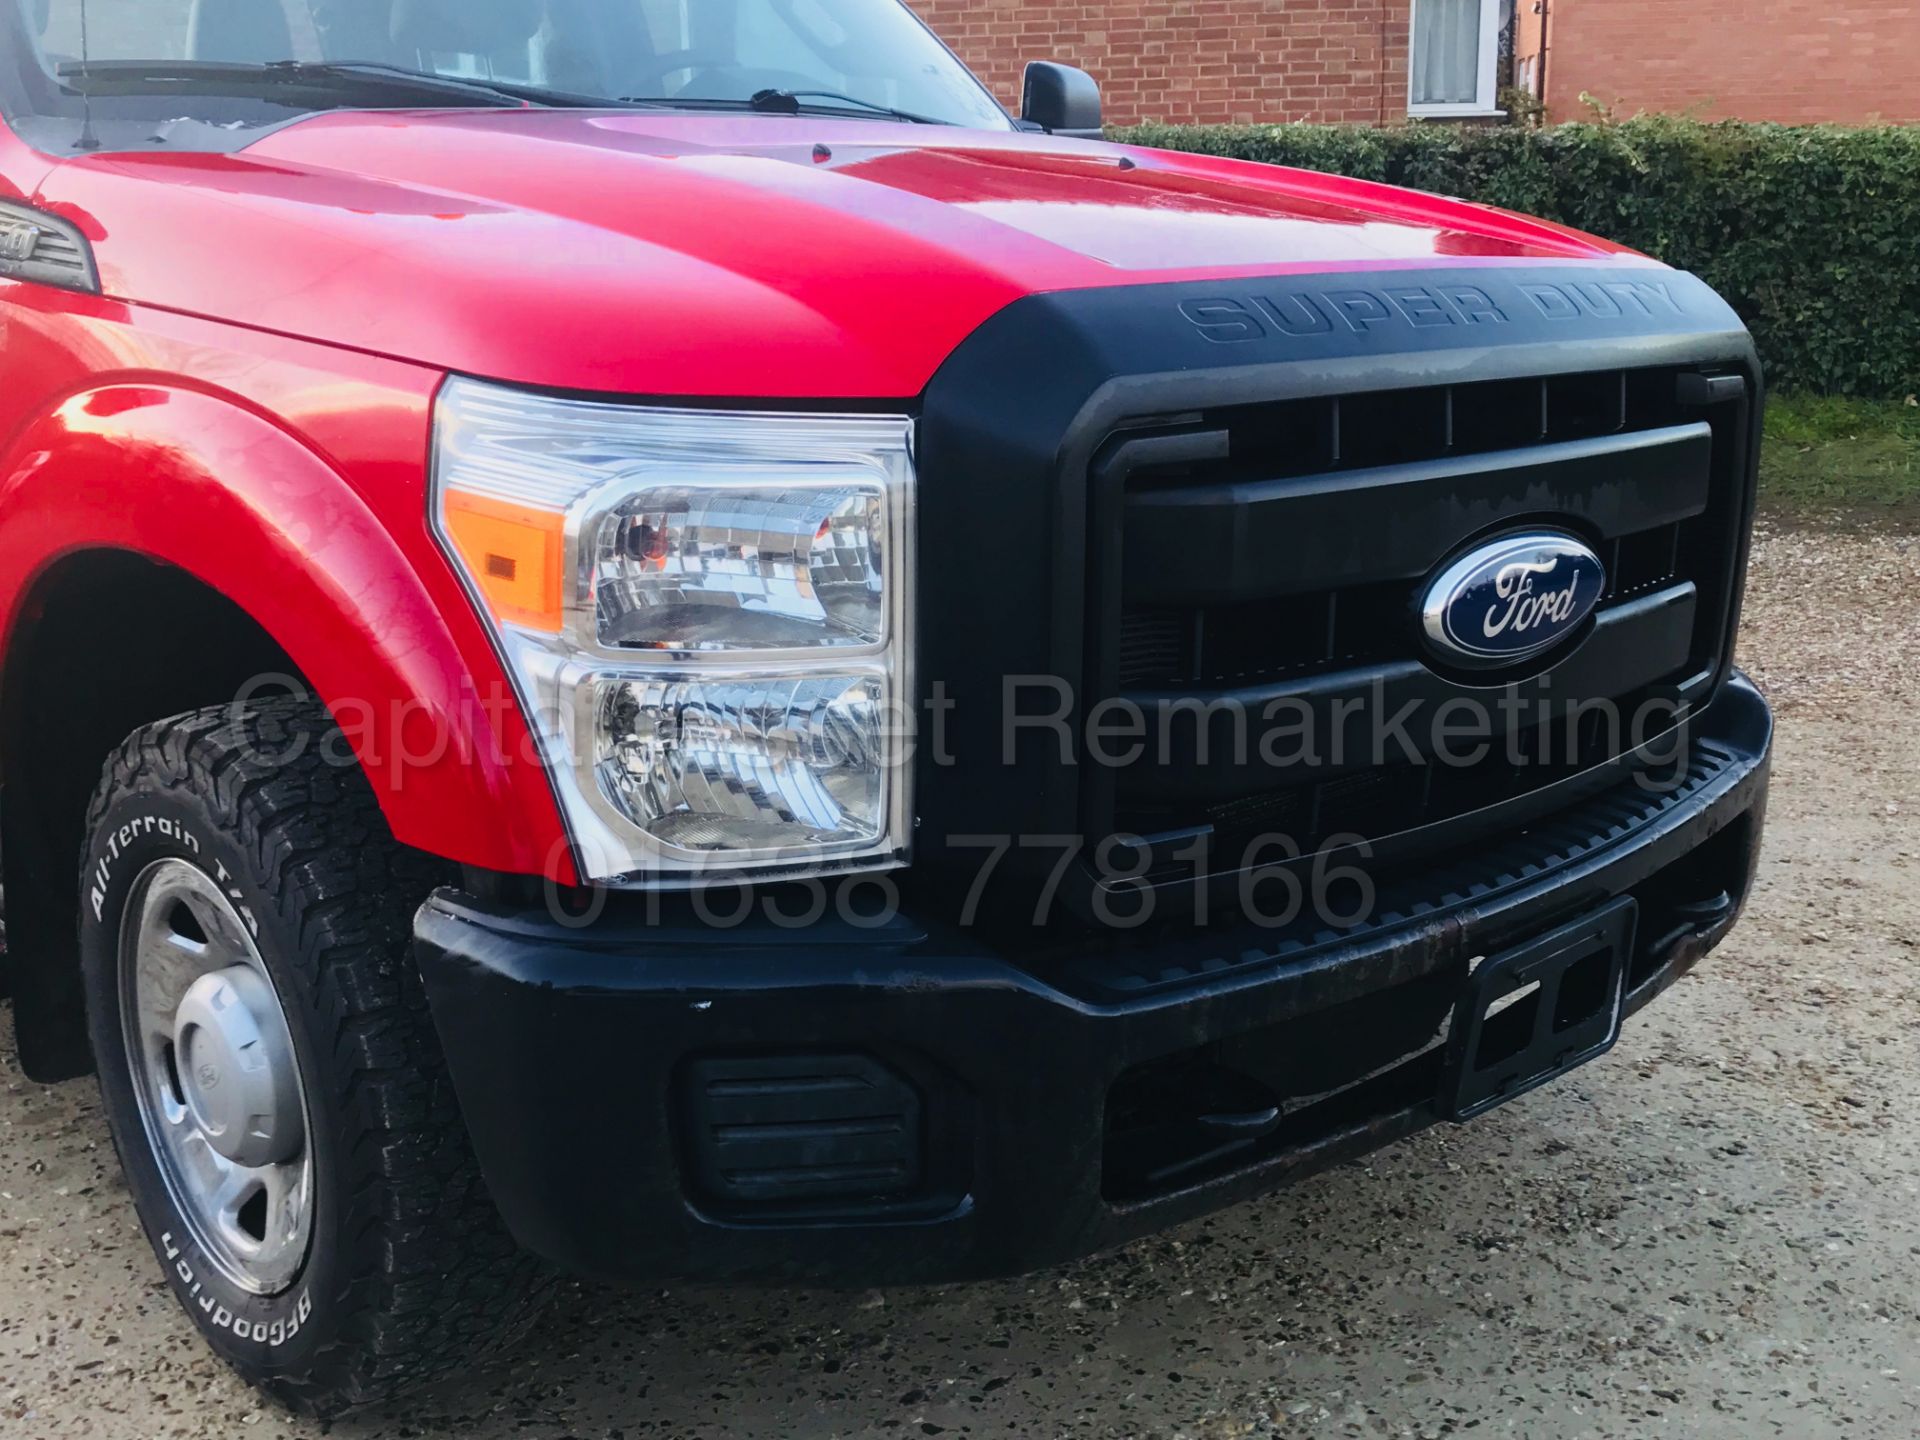 (On Sale) FORD F-250 SUPER DUTY 6.2 V8 FLEX FUEL (2011) XL - DOUBLE CAB PICK-UP **AIR CON - AUTO** - Image 4 of 27